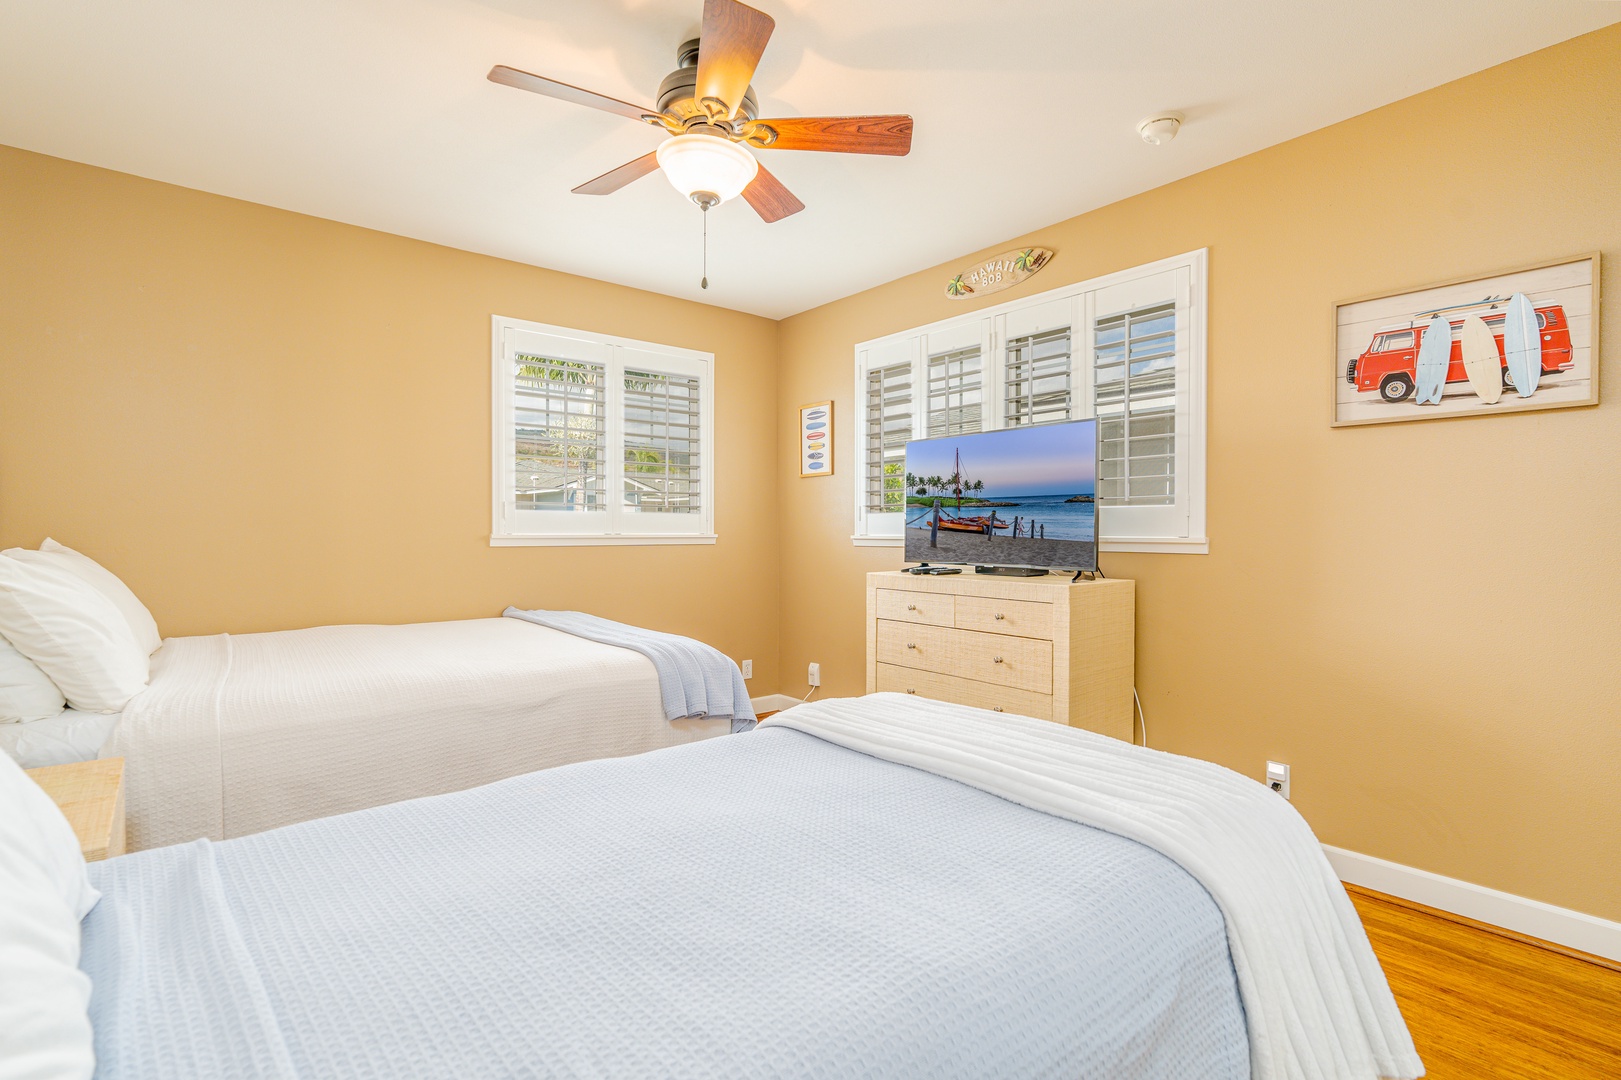 Kapolei Vacation Rentals, Ko Olina Kai 1081C - The upstairs guest bedroom with a TV and dresser.